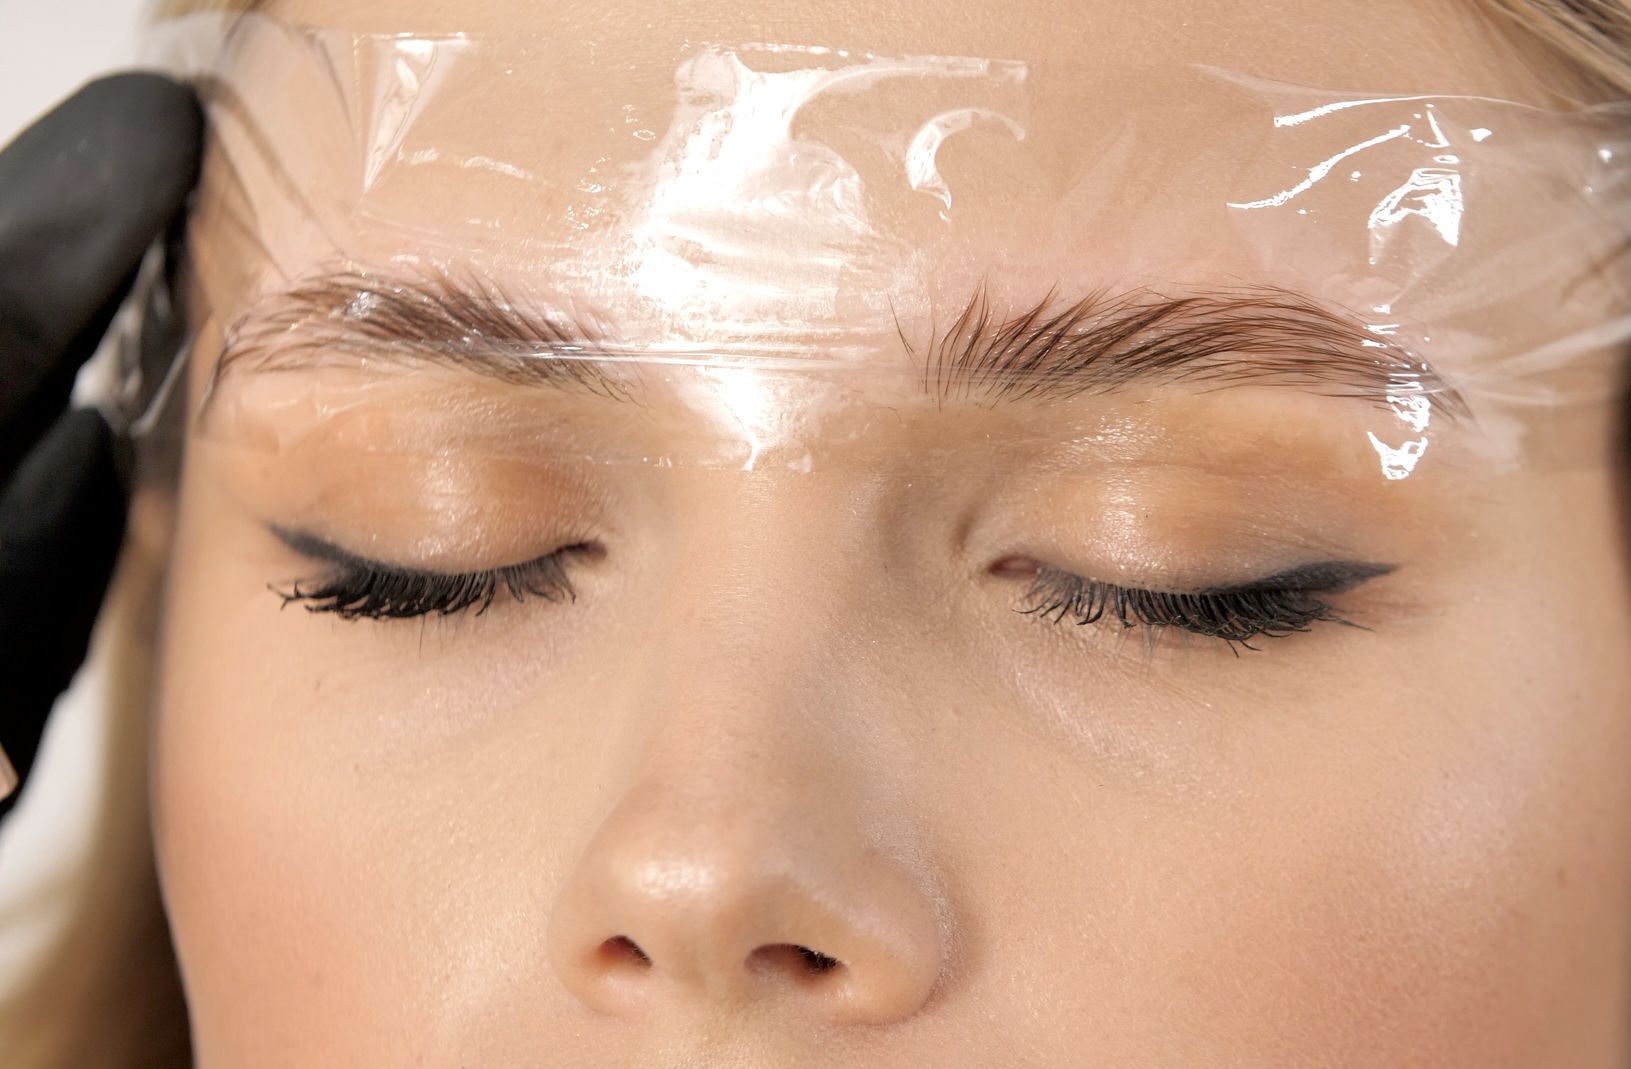 a close up of a woman 's face with plastic covering her eyebrows .